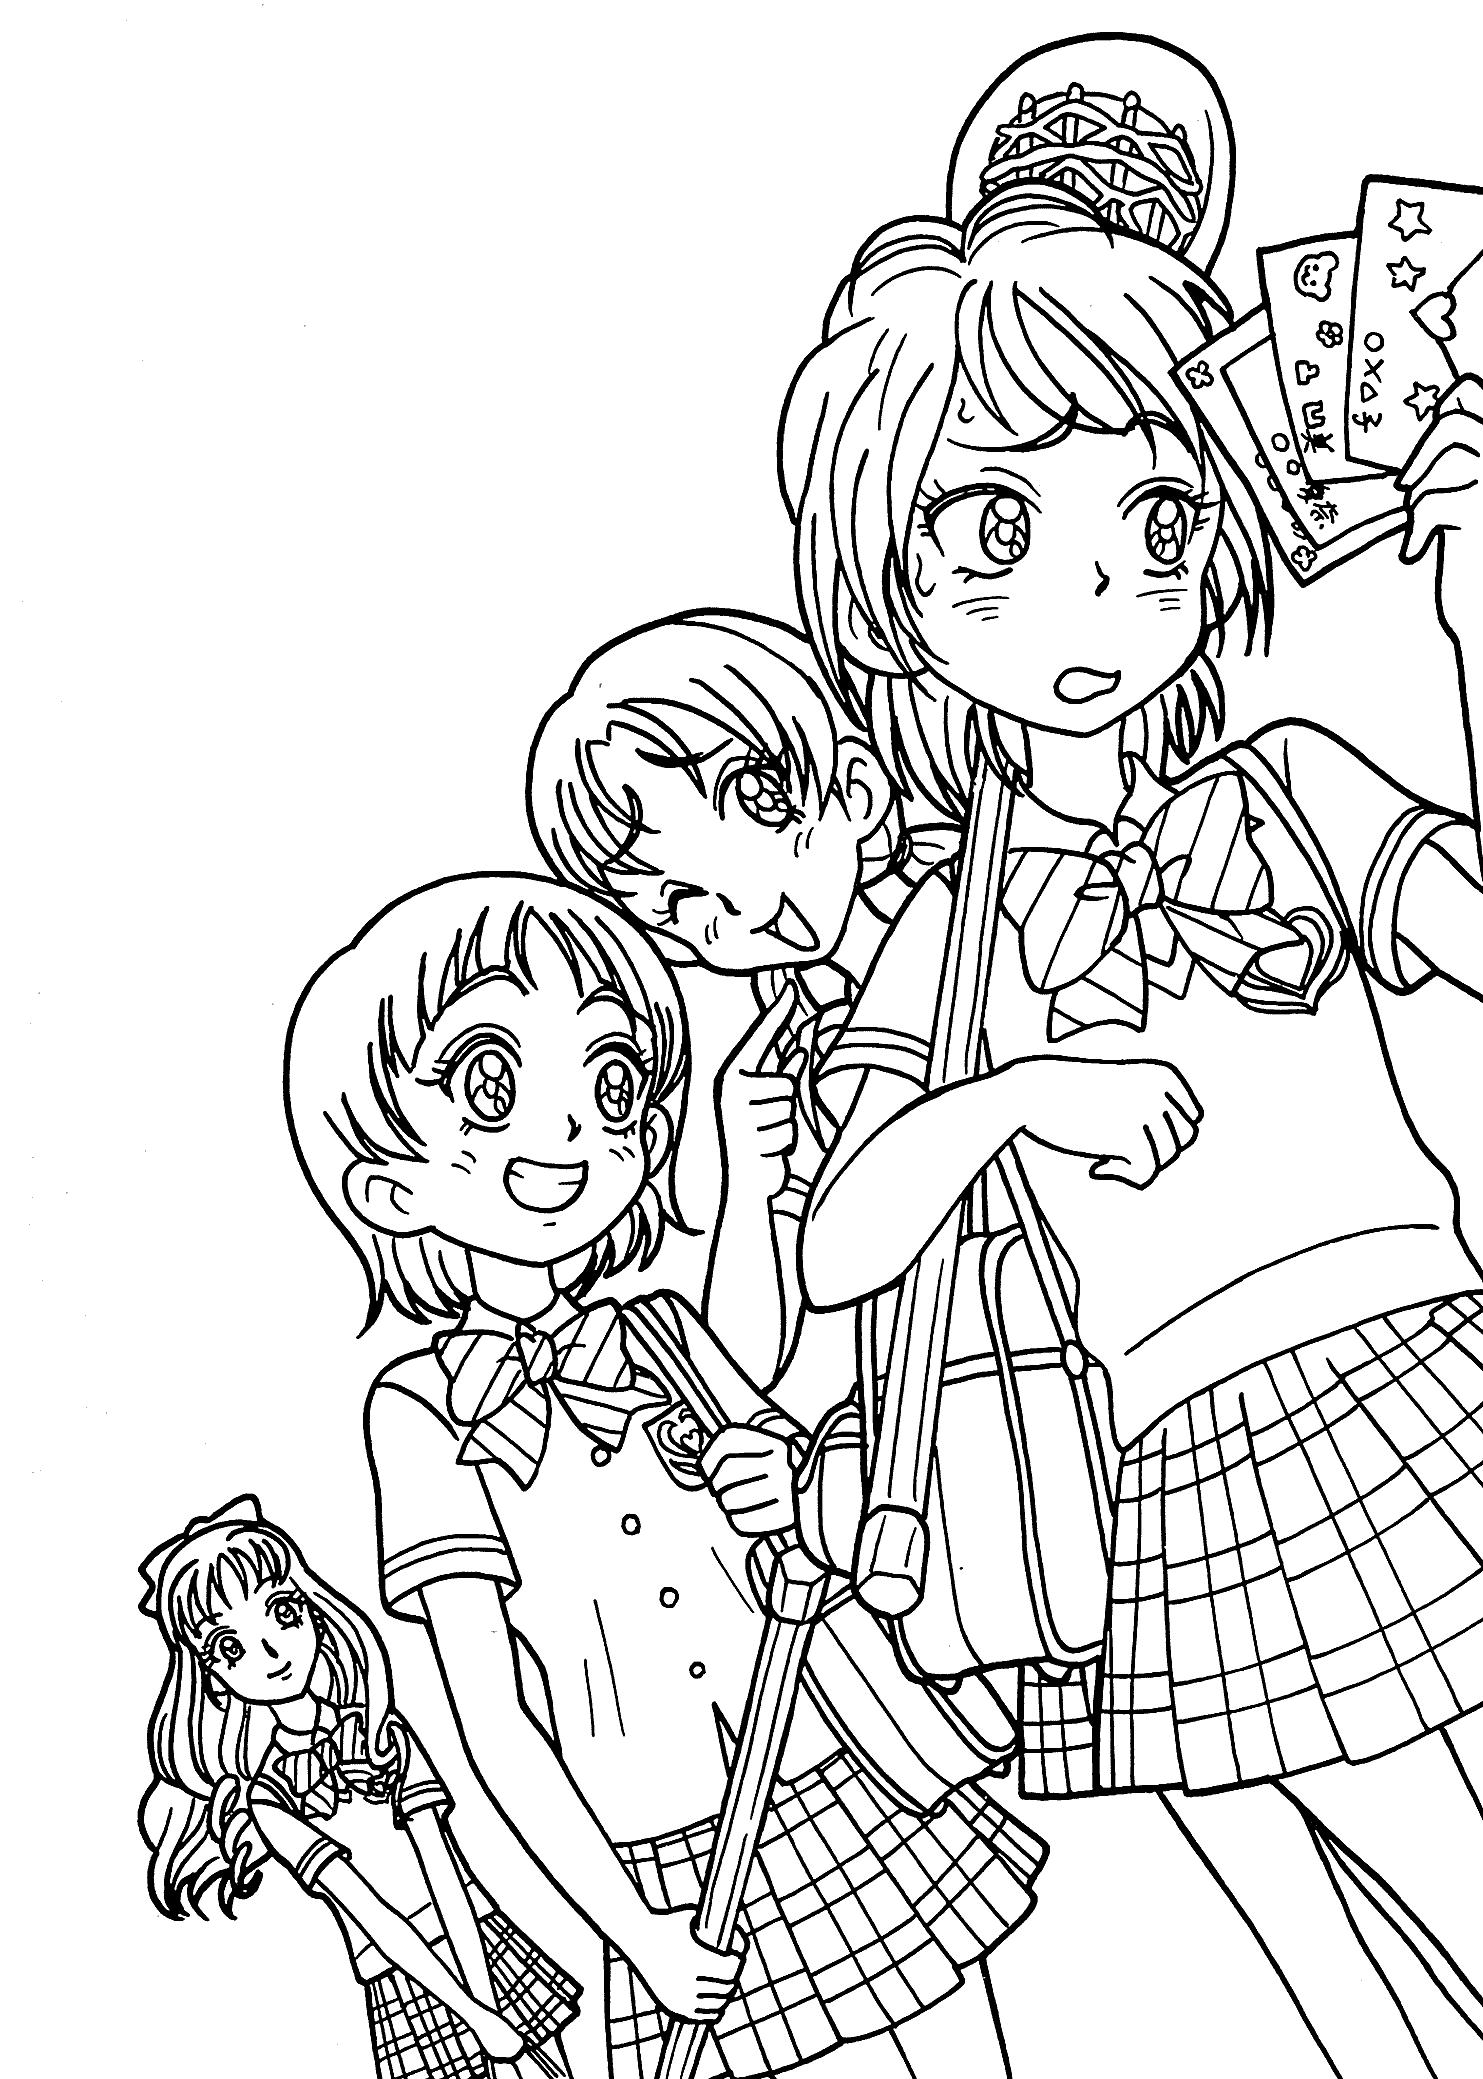 Cute Anime Girls Coloring Page